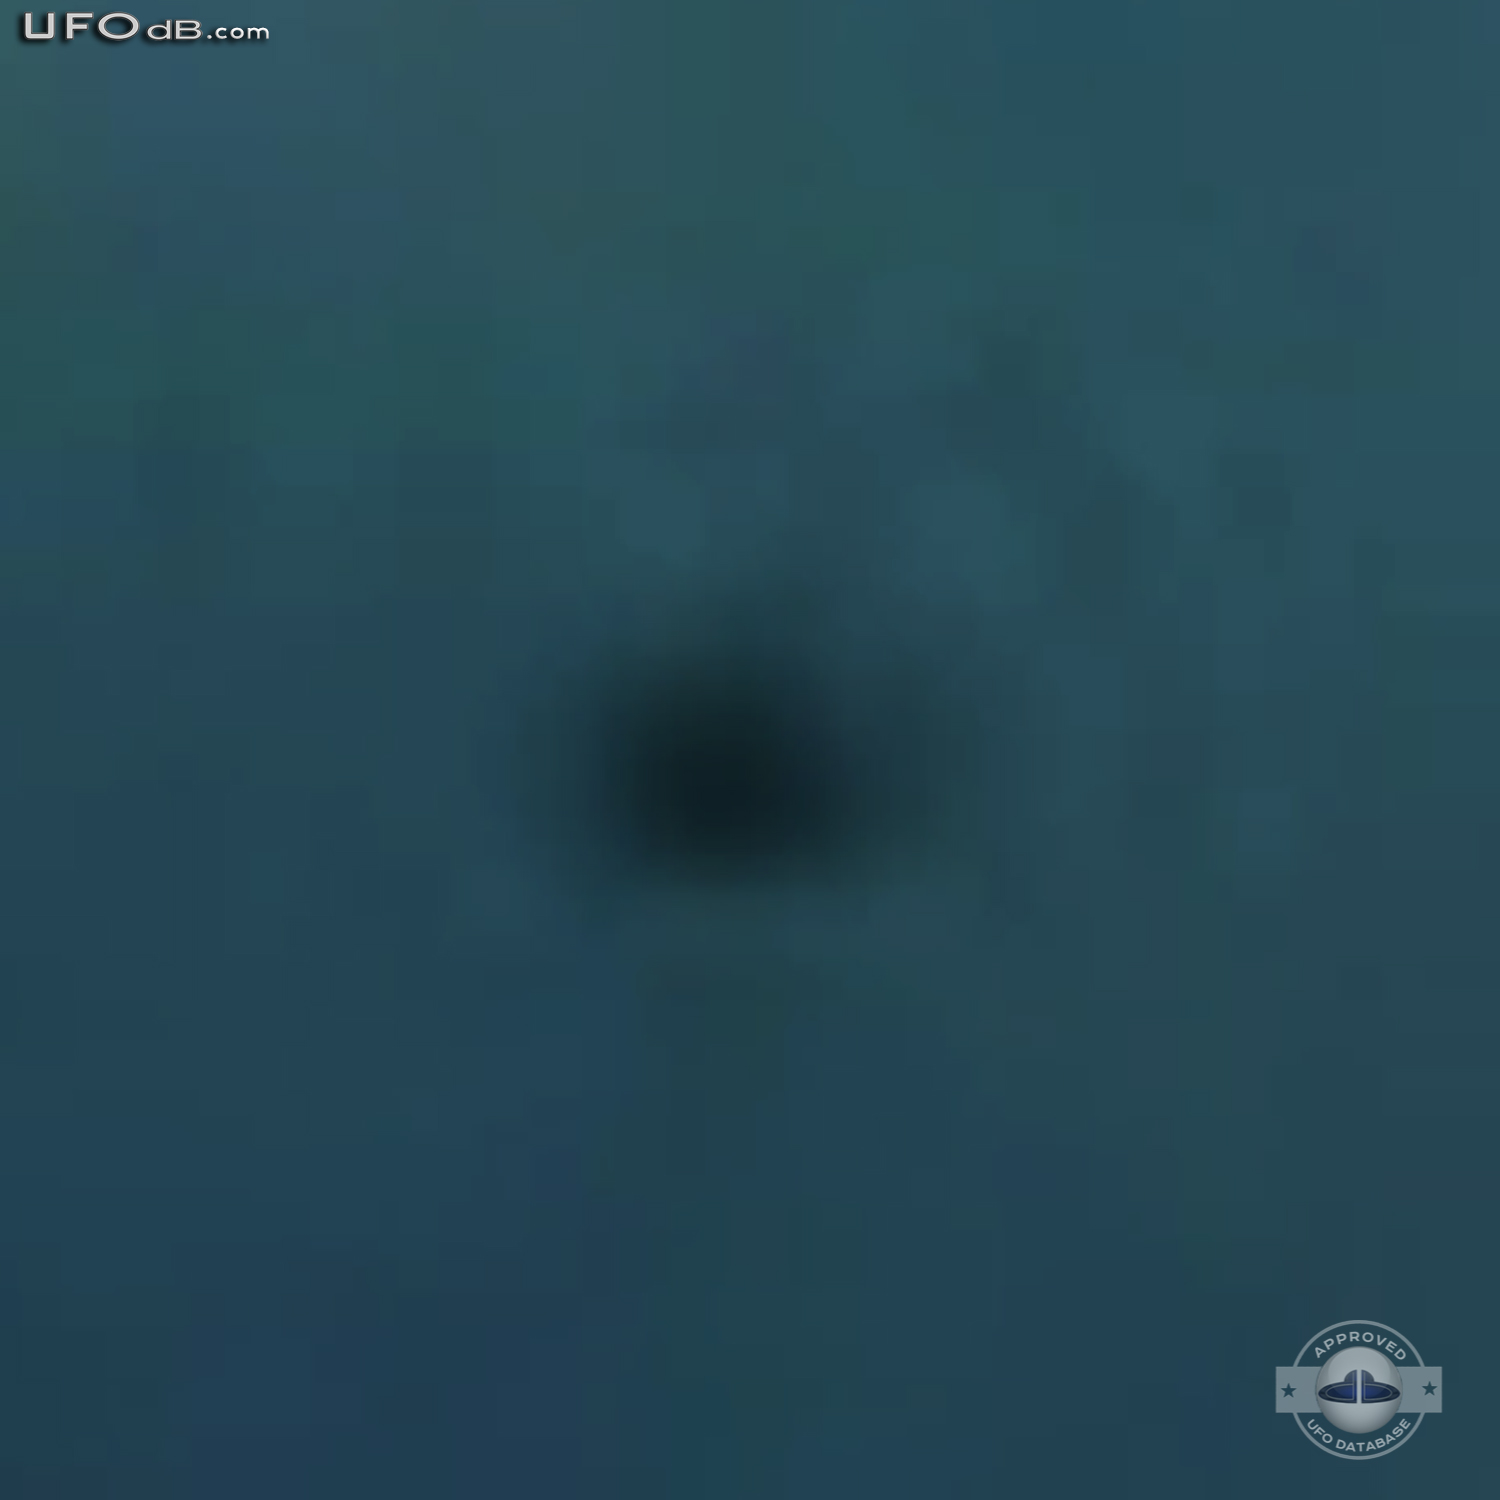 Group of UFOs hiding in the clouds in Cedar City, Utah | May 14 2011 UFO Picture #303-7